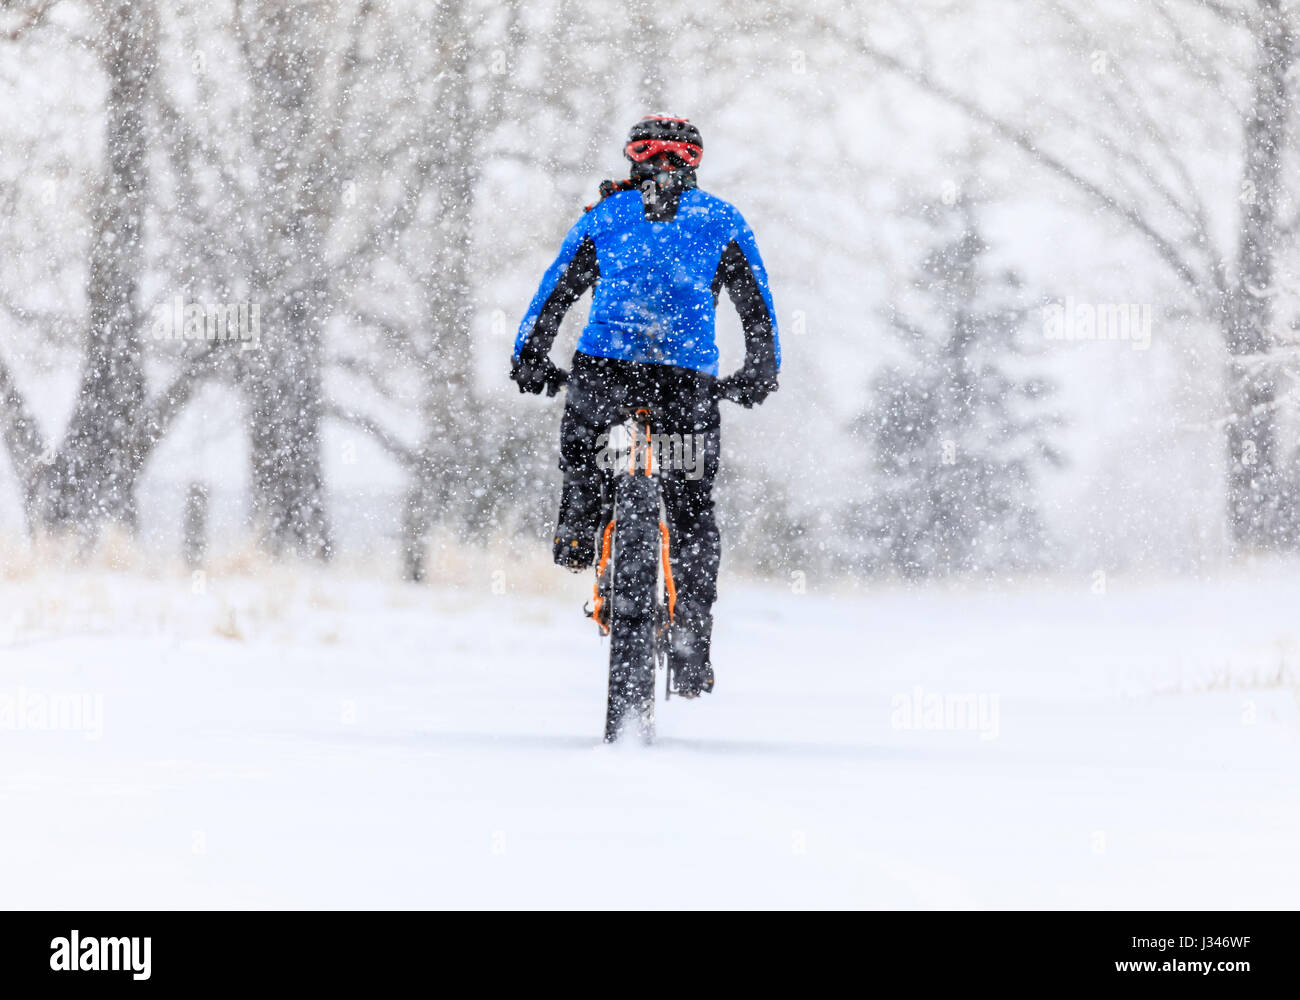 Riding a fat bike in a winter storm, Thunder Bay, Ontario, Canada. Stock Photo